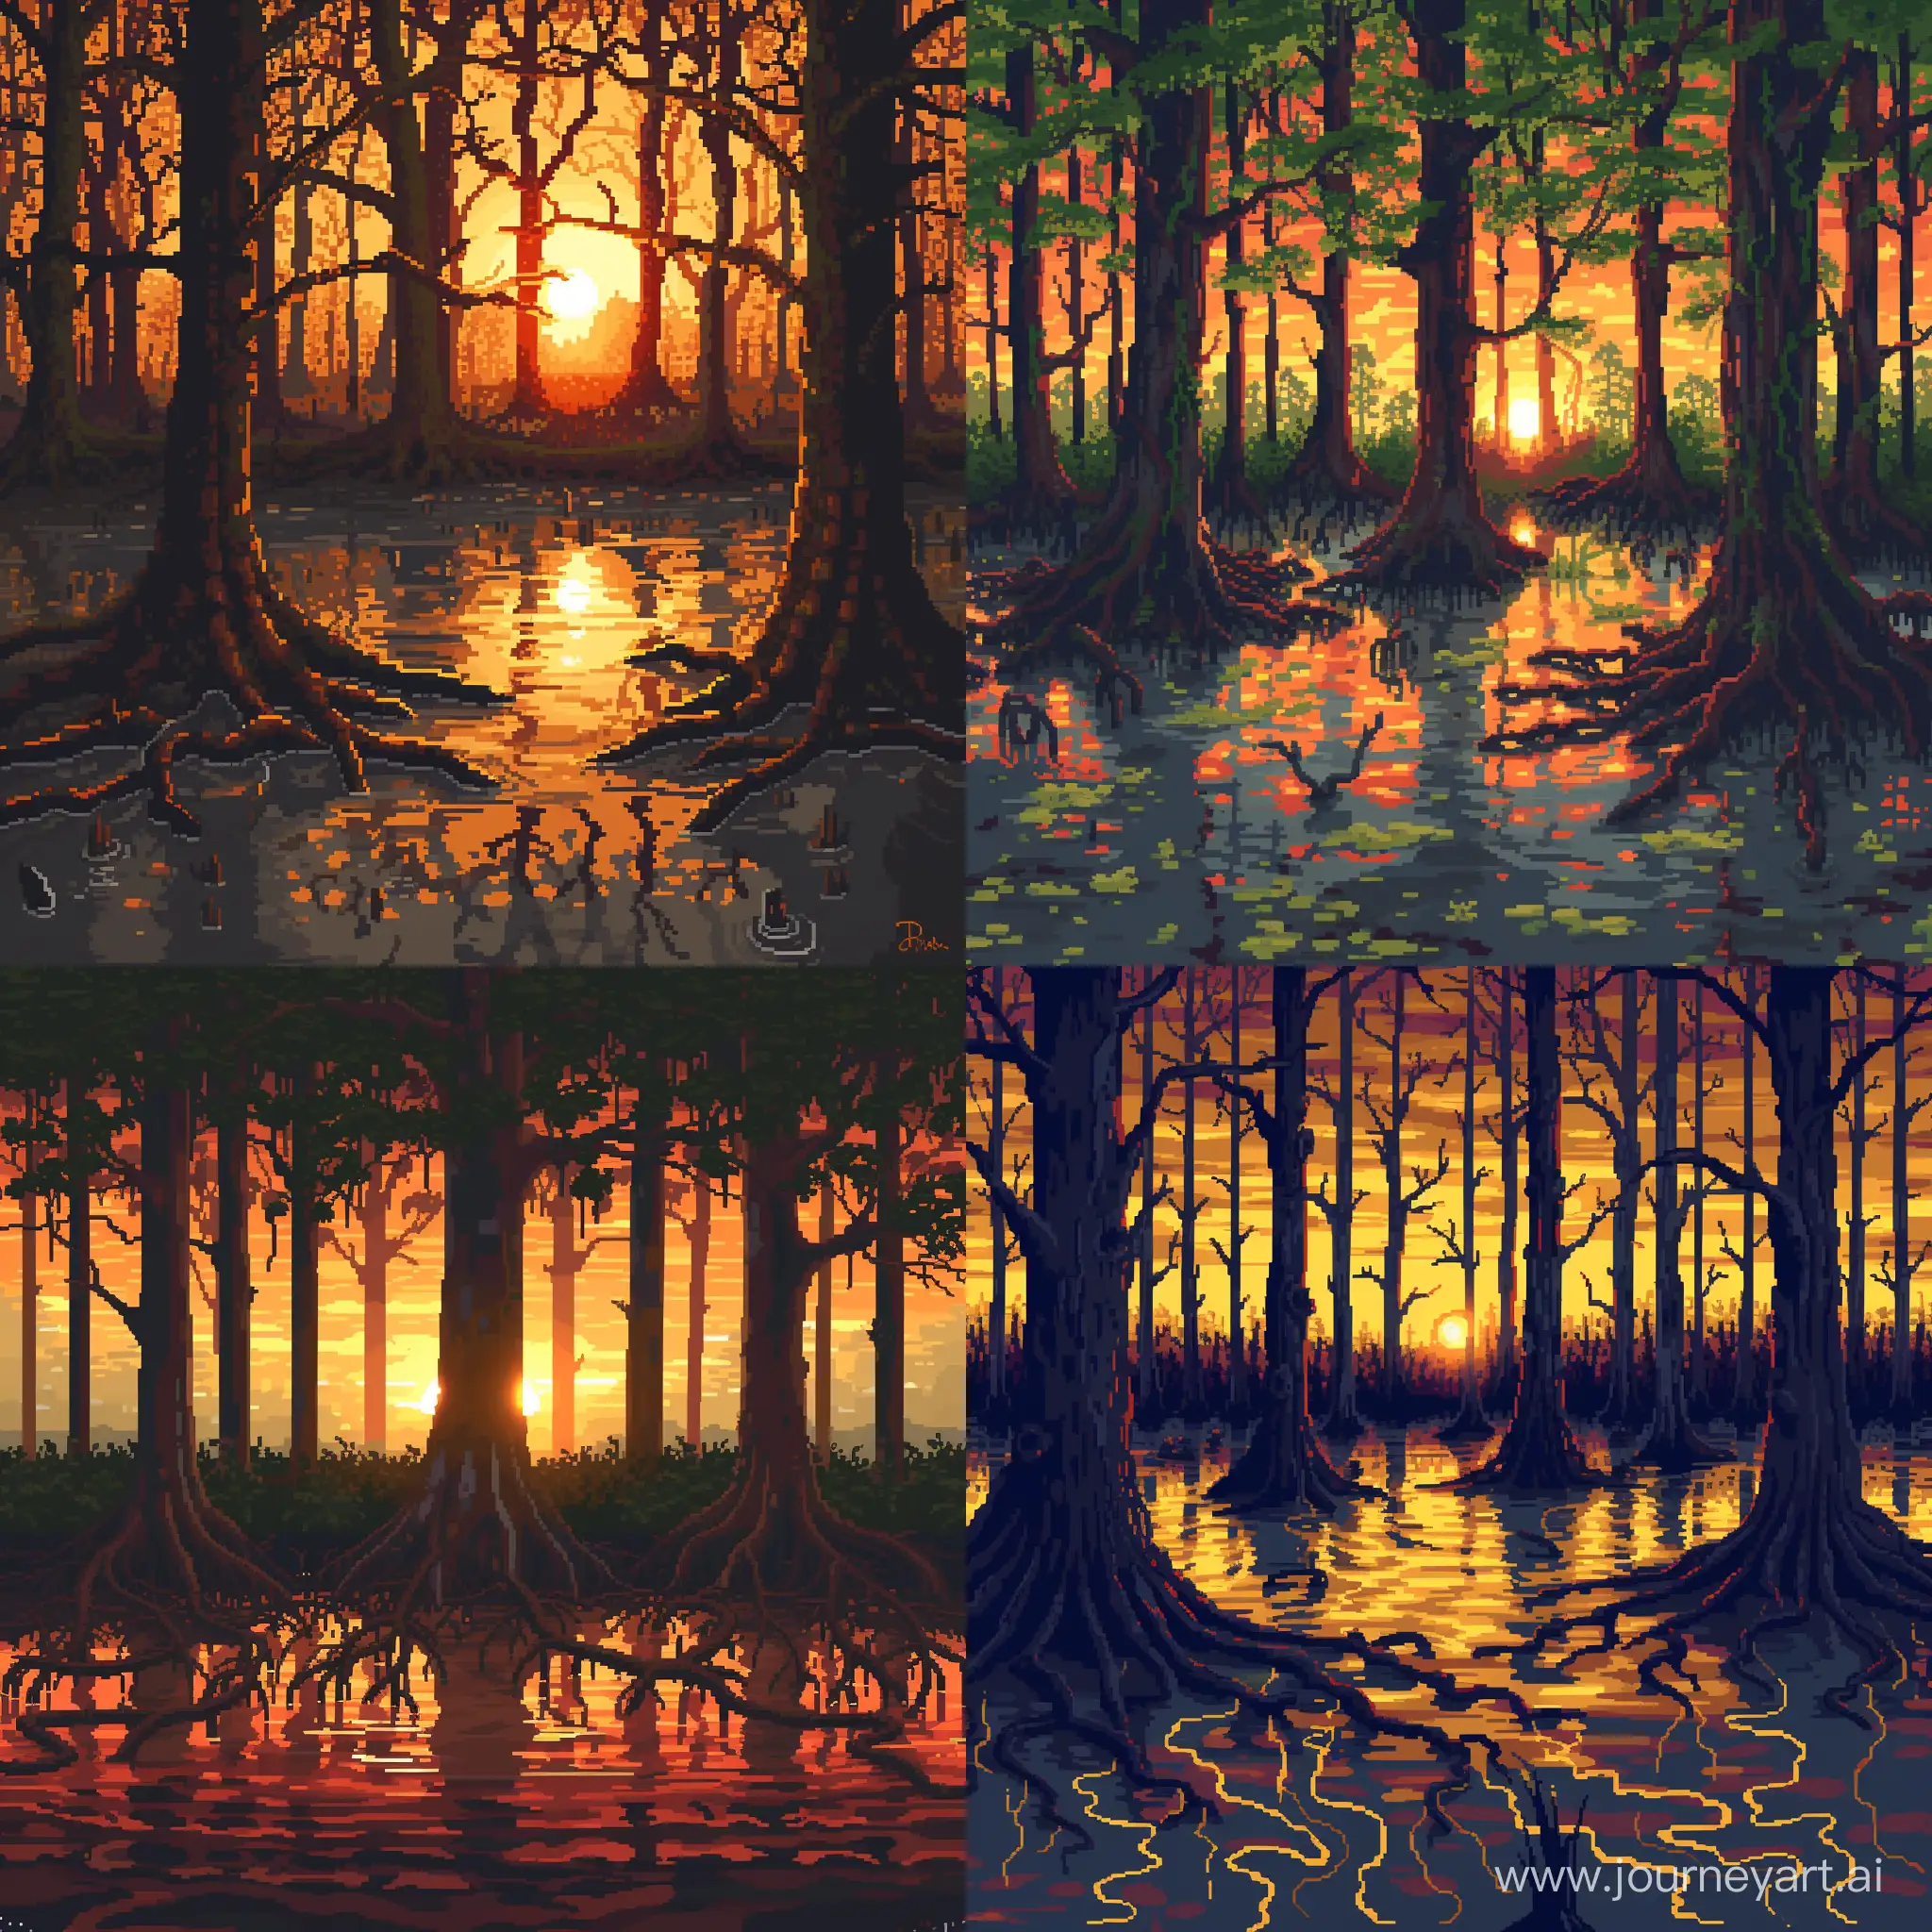 Pixel art sunny swamp forest at sunset, where the roots of the trees are all under water